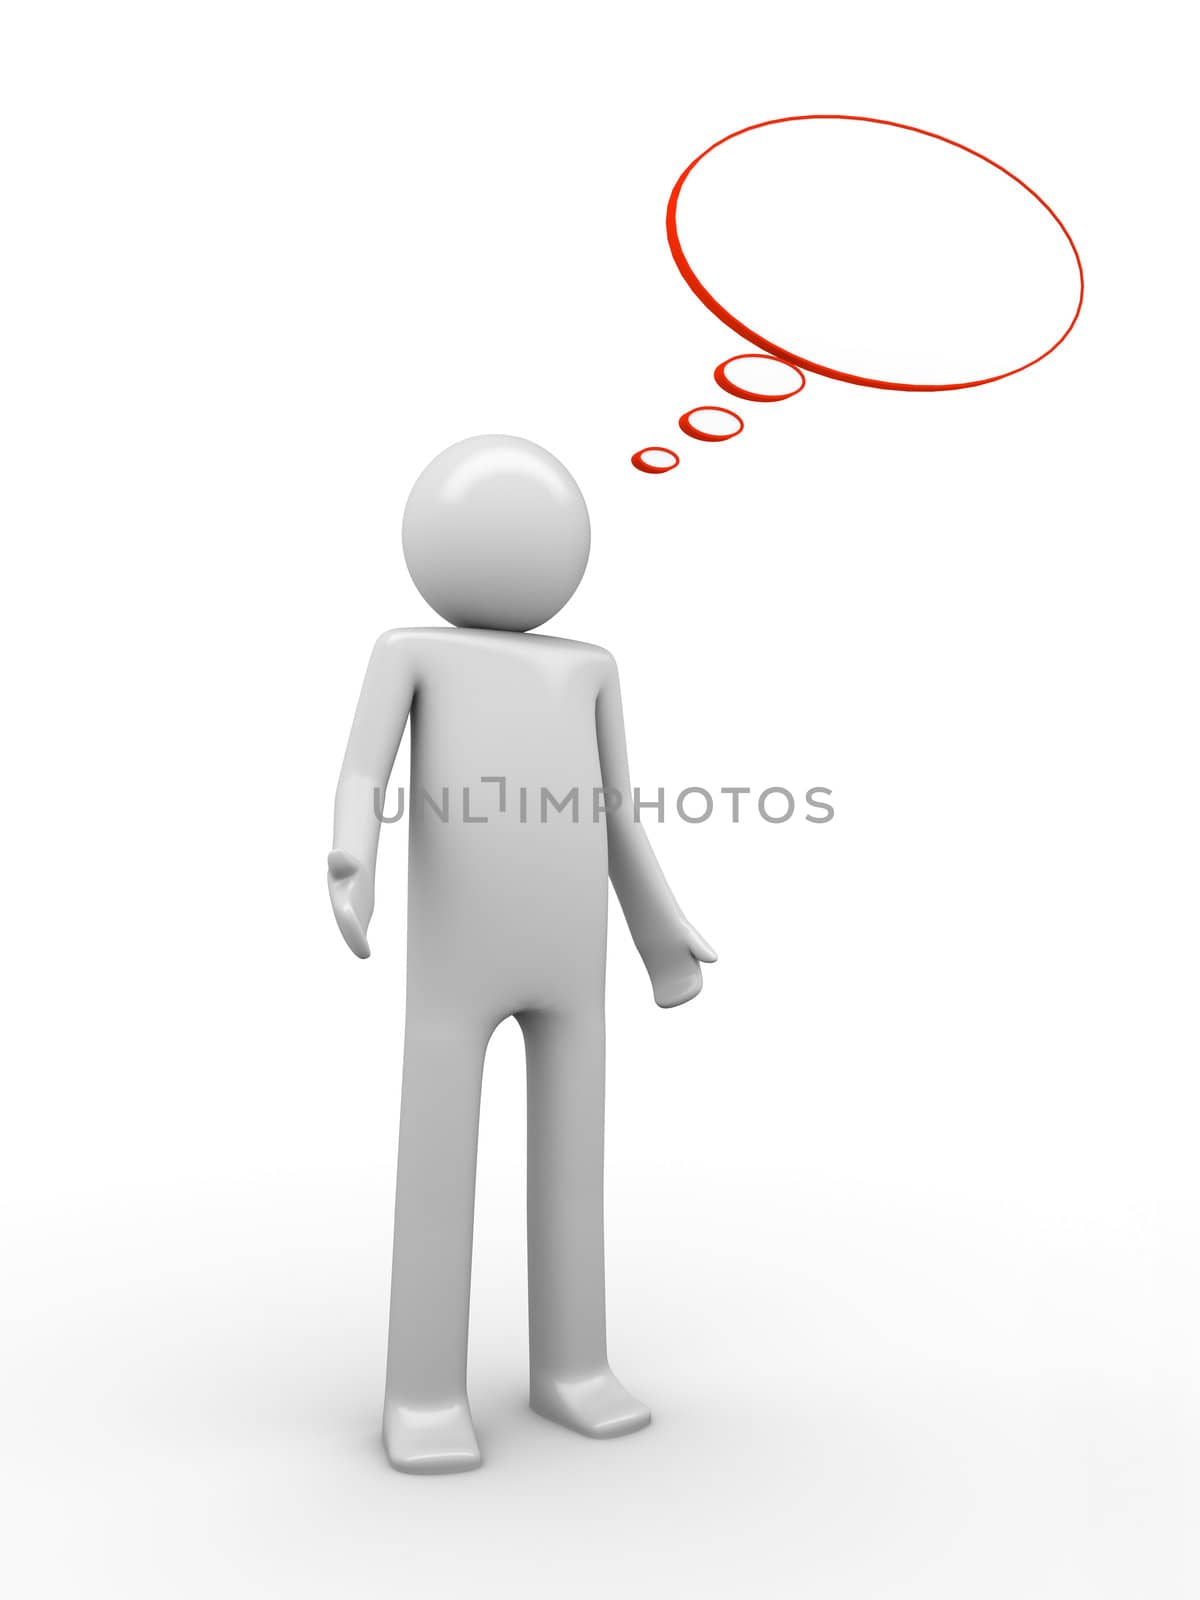 3d rendered copyspaced image with a man standing on a white background with an empty baloon with copyspace to white a text or collage an image